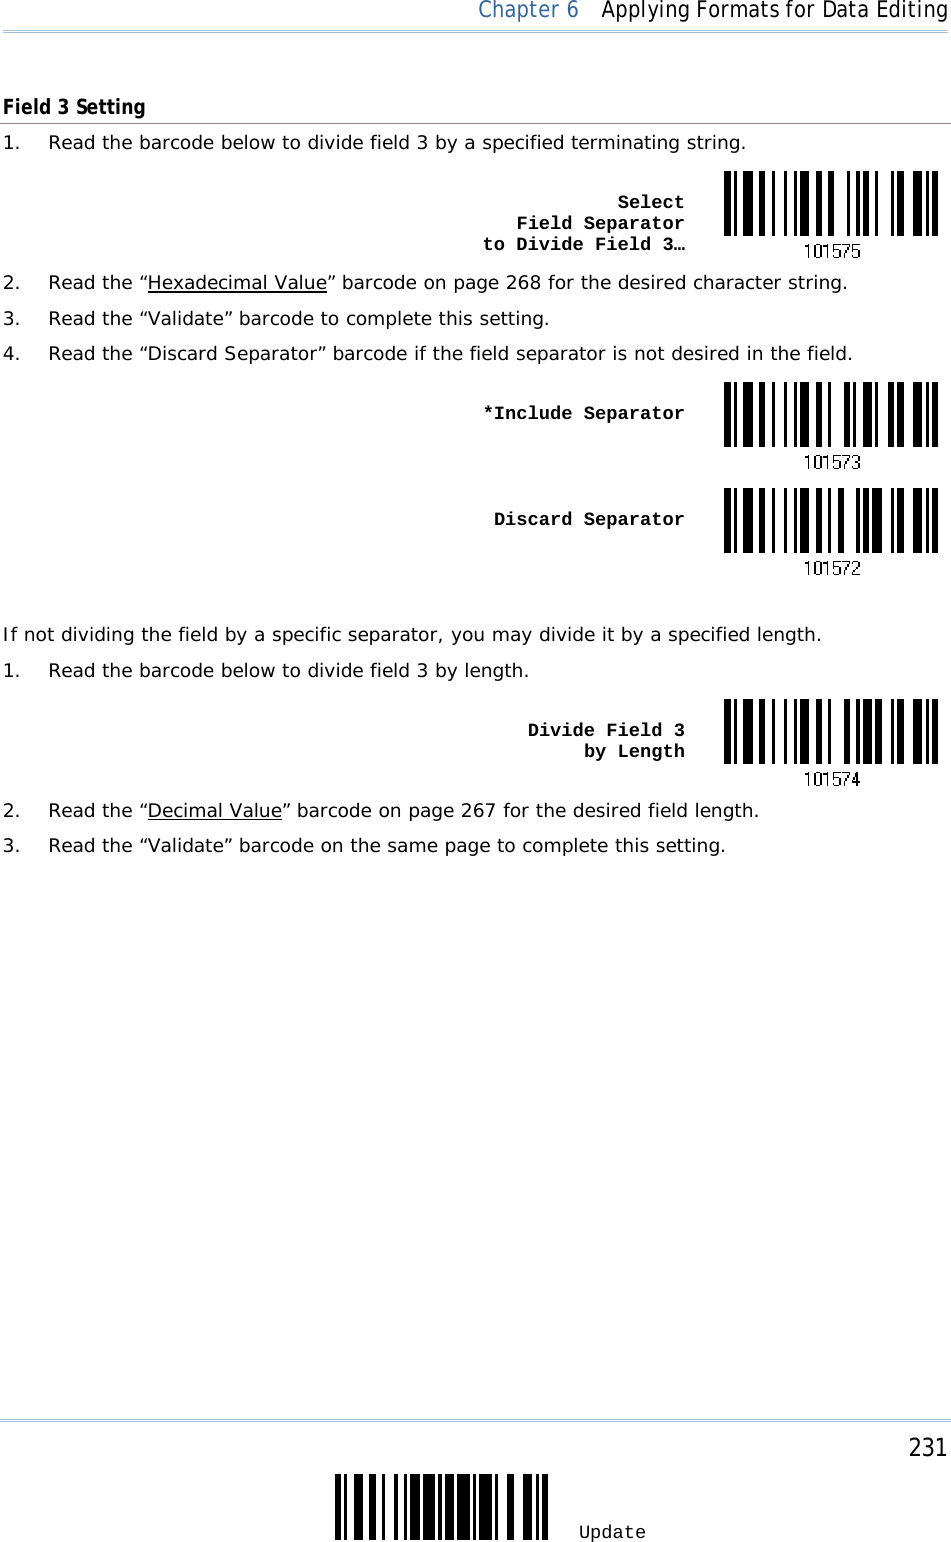     231 Update  Chapter 6  Applying Formats for Data Editing Field 3 Setting 1.  Read the barcode below to divide field 3 by a specified terminating string.  Select  Field Separator  to Divide Field 3…2.  Read the “Hexadecimal Value” barcode on page 268 for the desired character string. 3.  Read the “Validate” barcode to complete this setting. 4.  Read the “Discard Separator” barcode if the field separator is not desired in the field.  *Include Separator Discard Separator If not dividing the field by a specific separator, you may divide it by a specified length. 1.  Read the barcode below to divide field 3 by length.  Divide Field 3  by Length2.  Read the “Decimal Value” barcode on page 267 for the desired field length. 3.  Read the “Validate” barcode on the same page to complete this setting.                    